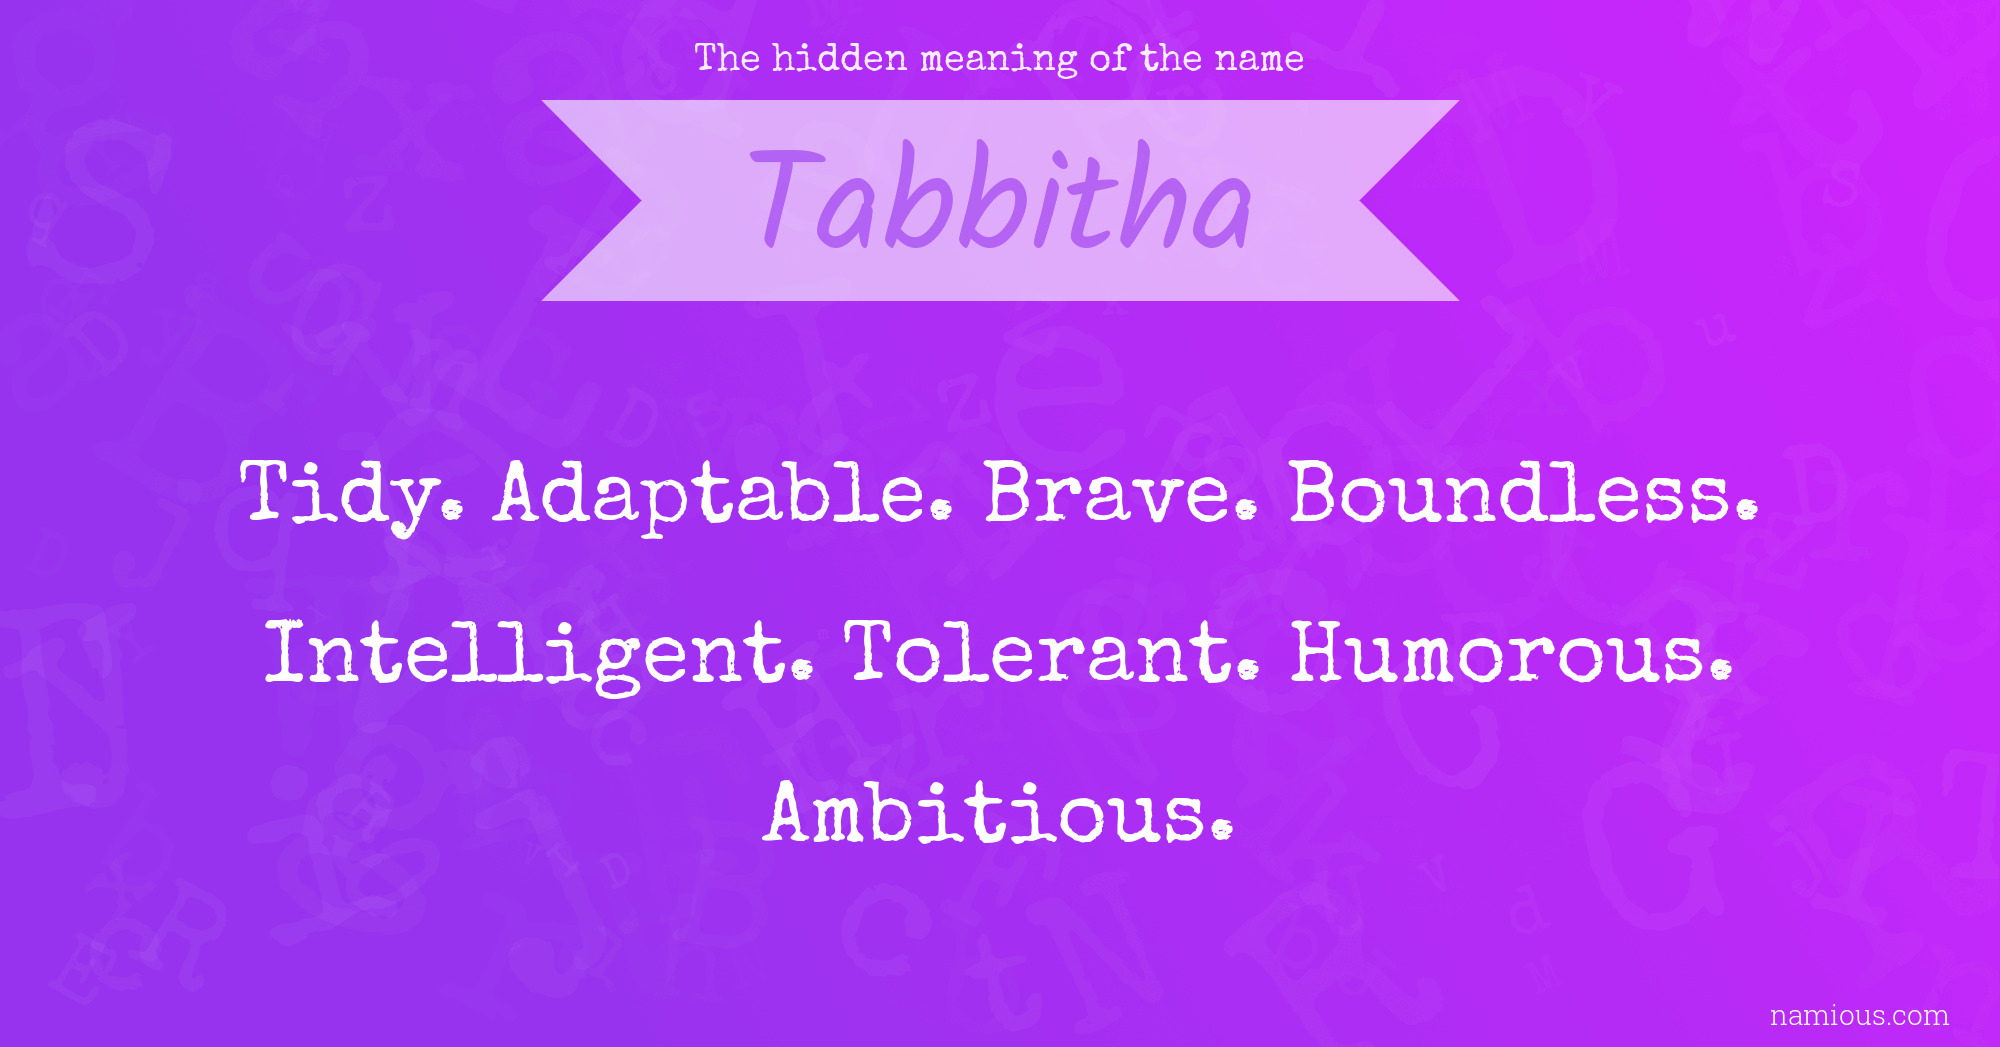 The hidden meaning of the name Tabbitha